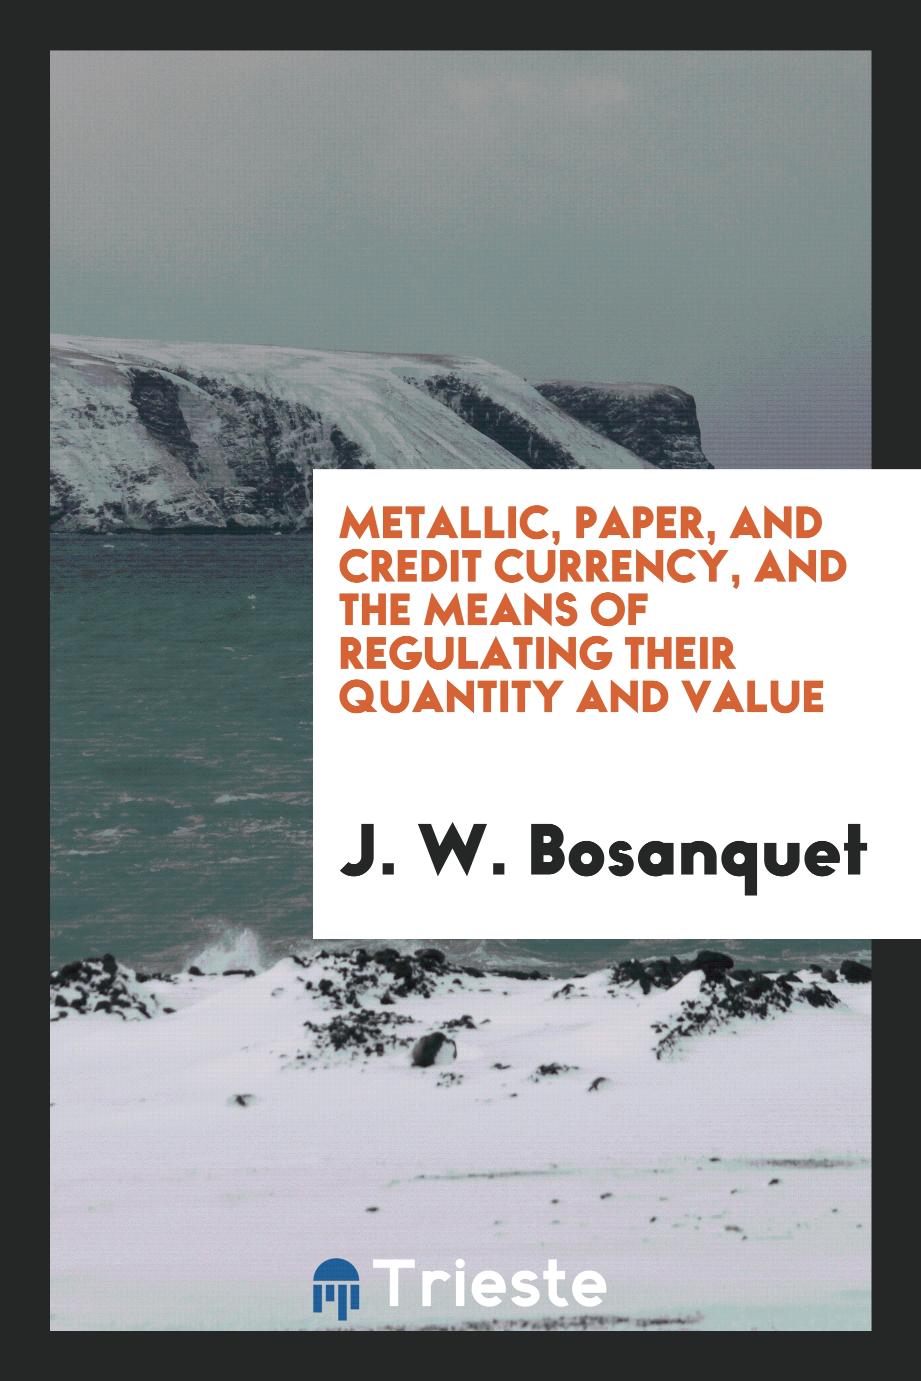 Metallic, Paper, and Credit Currency, and the Means of Regulating Their Quantity and Value